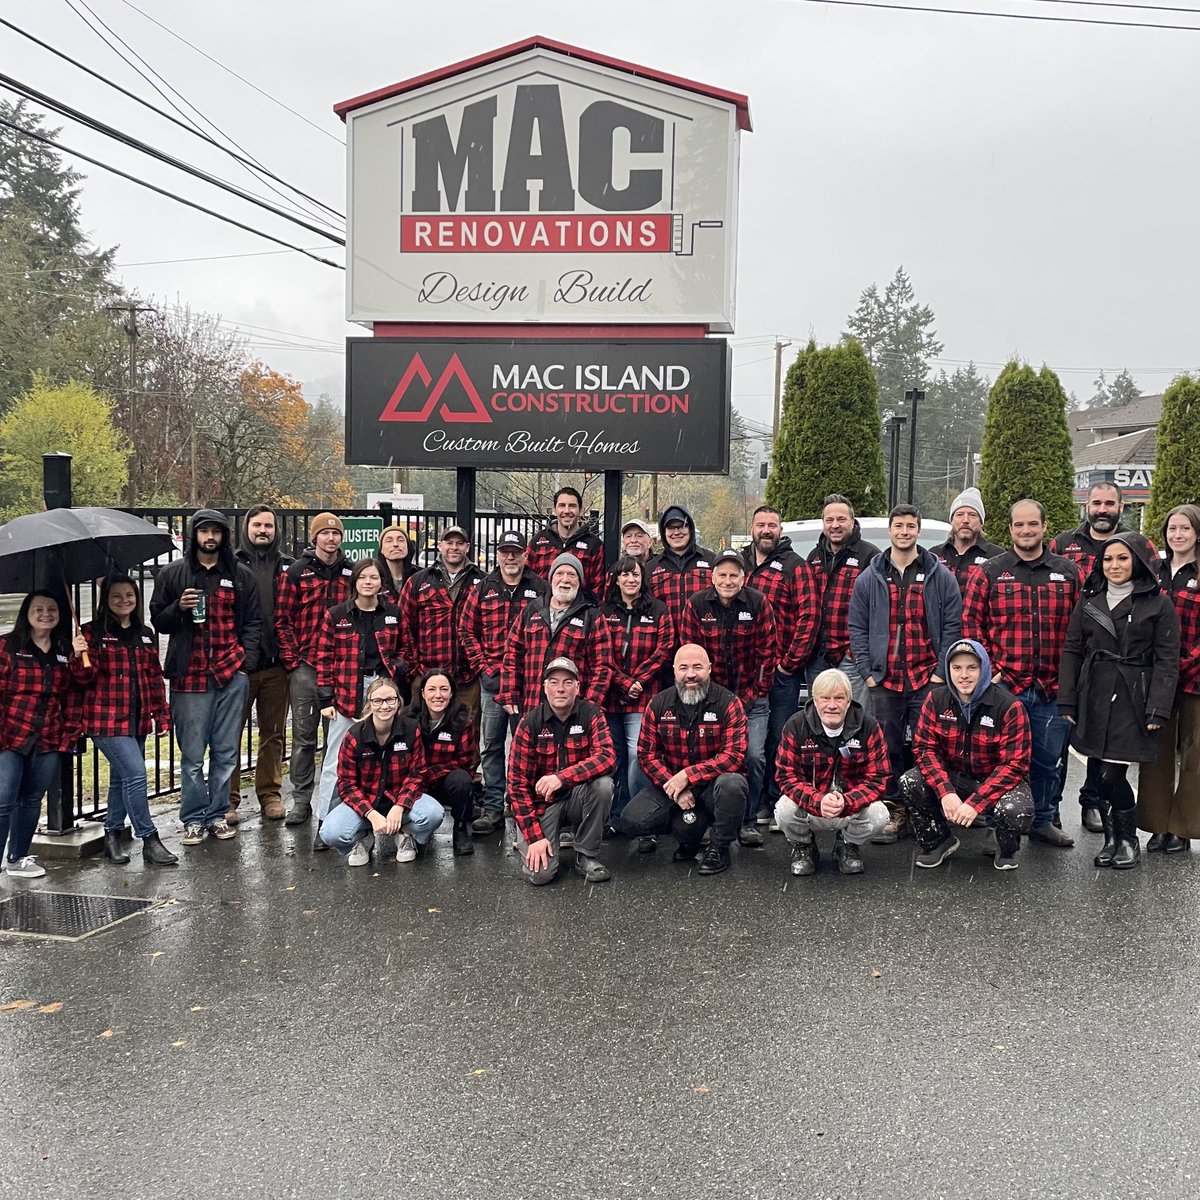 We are thrilled to welcome @MAC_Renovations back as a 10 to Watch sponsor for the 4th year. The company's President, Blaise McDonald says, 'as an entrepreneur myself, I'm particularly happy to celebrate startups whose services and products will enrich our lives.'